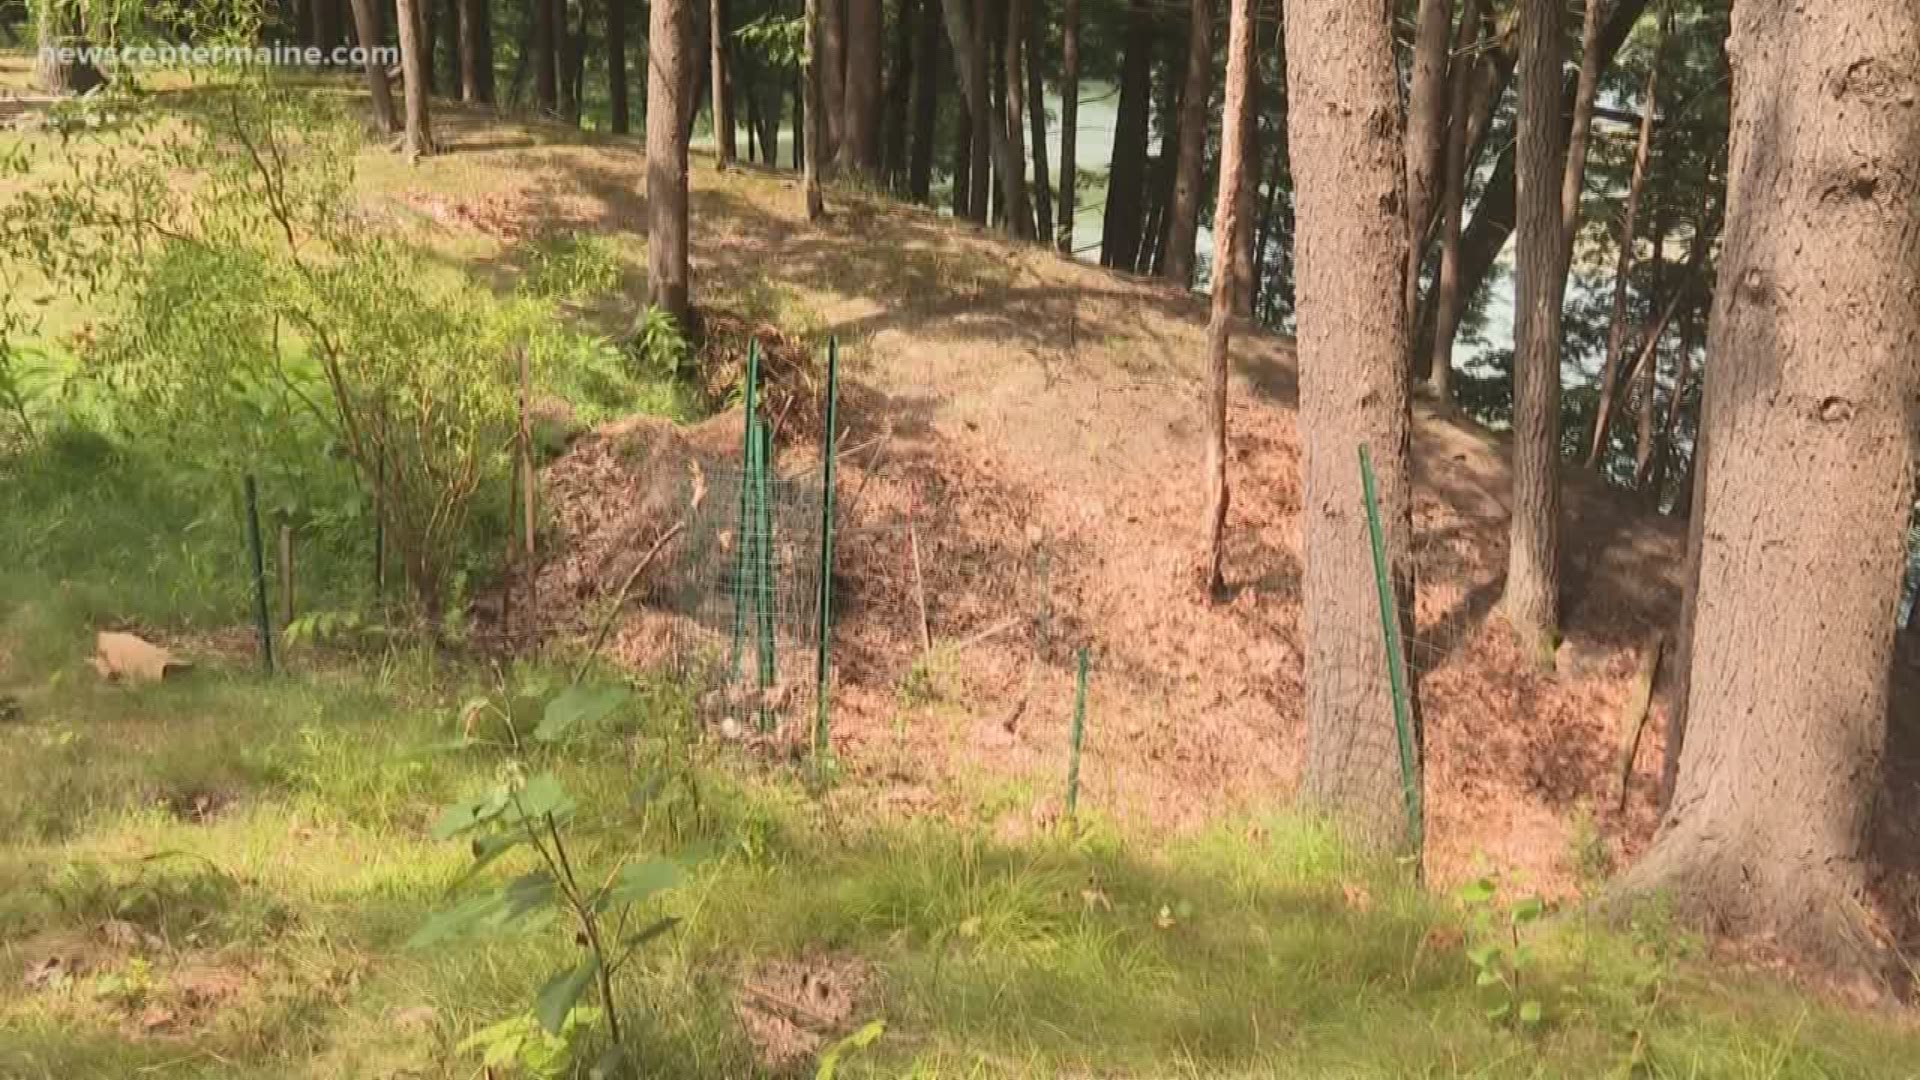 A Falmouth woman says her neighbor cleared more than half a dozen trees along her property line three years ago, causing erosion.